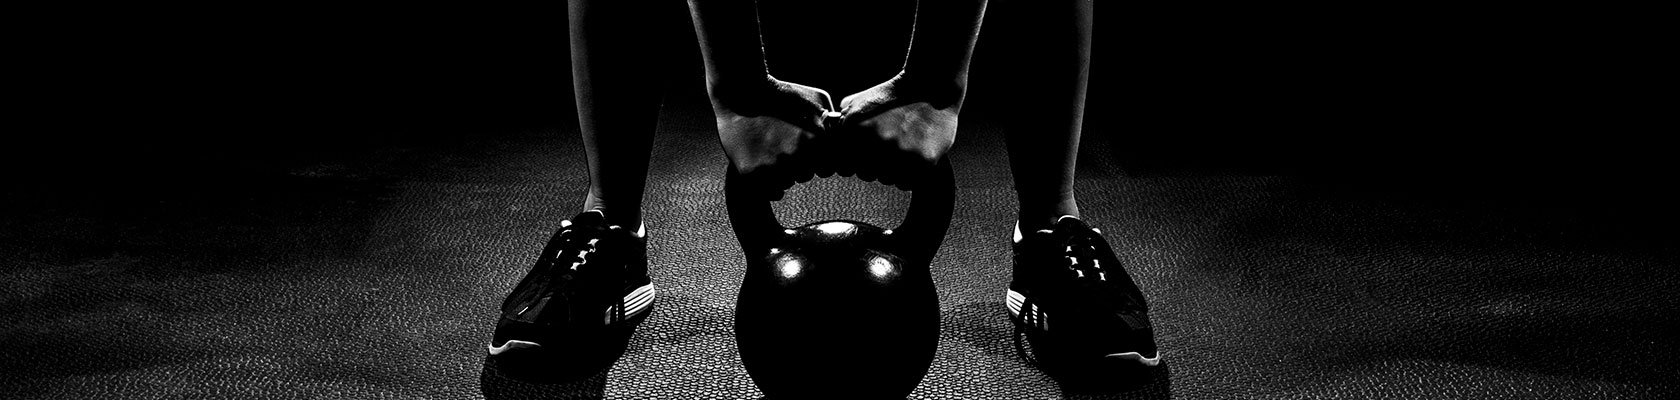 a black and white image of someone holding the handle of a kettle bell on the ground